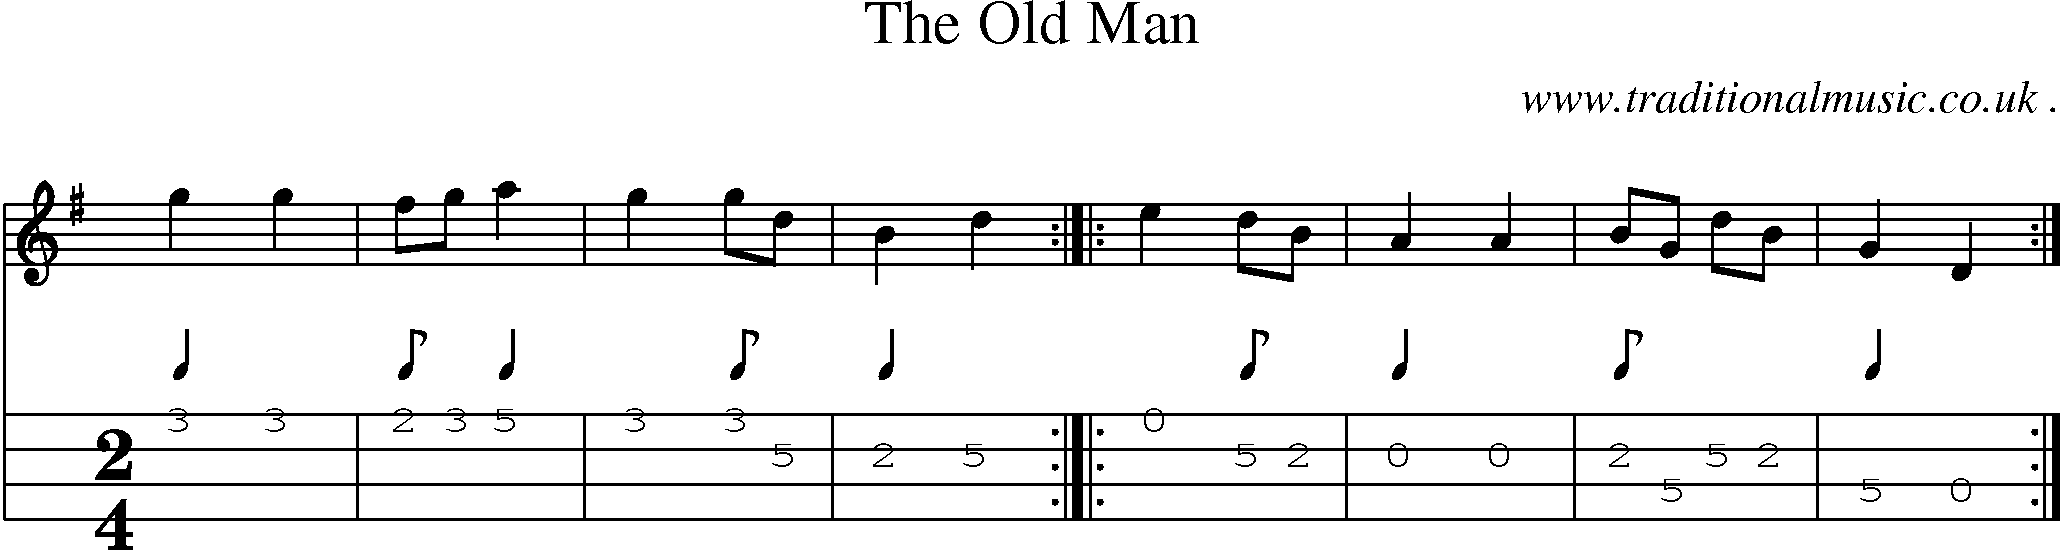 Sheet-music  score, Chords and Mandolin Tabs for The Old Man